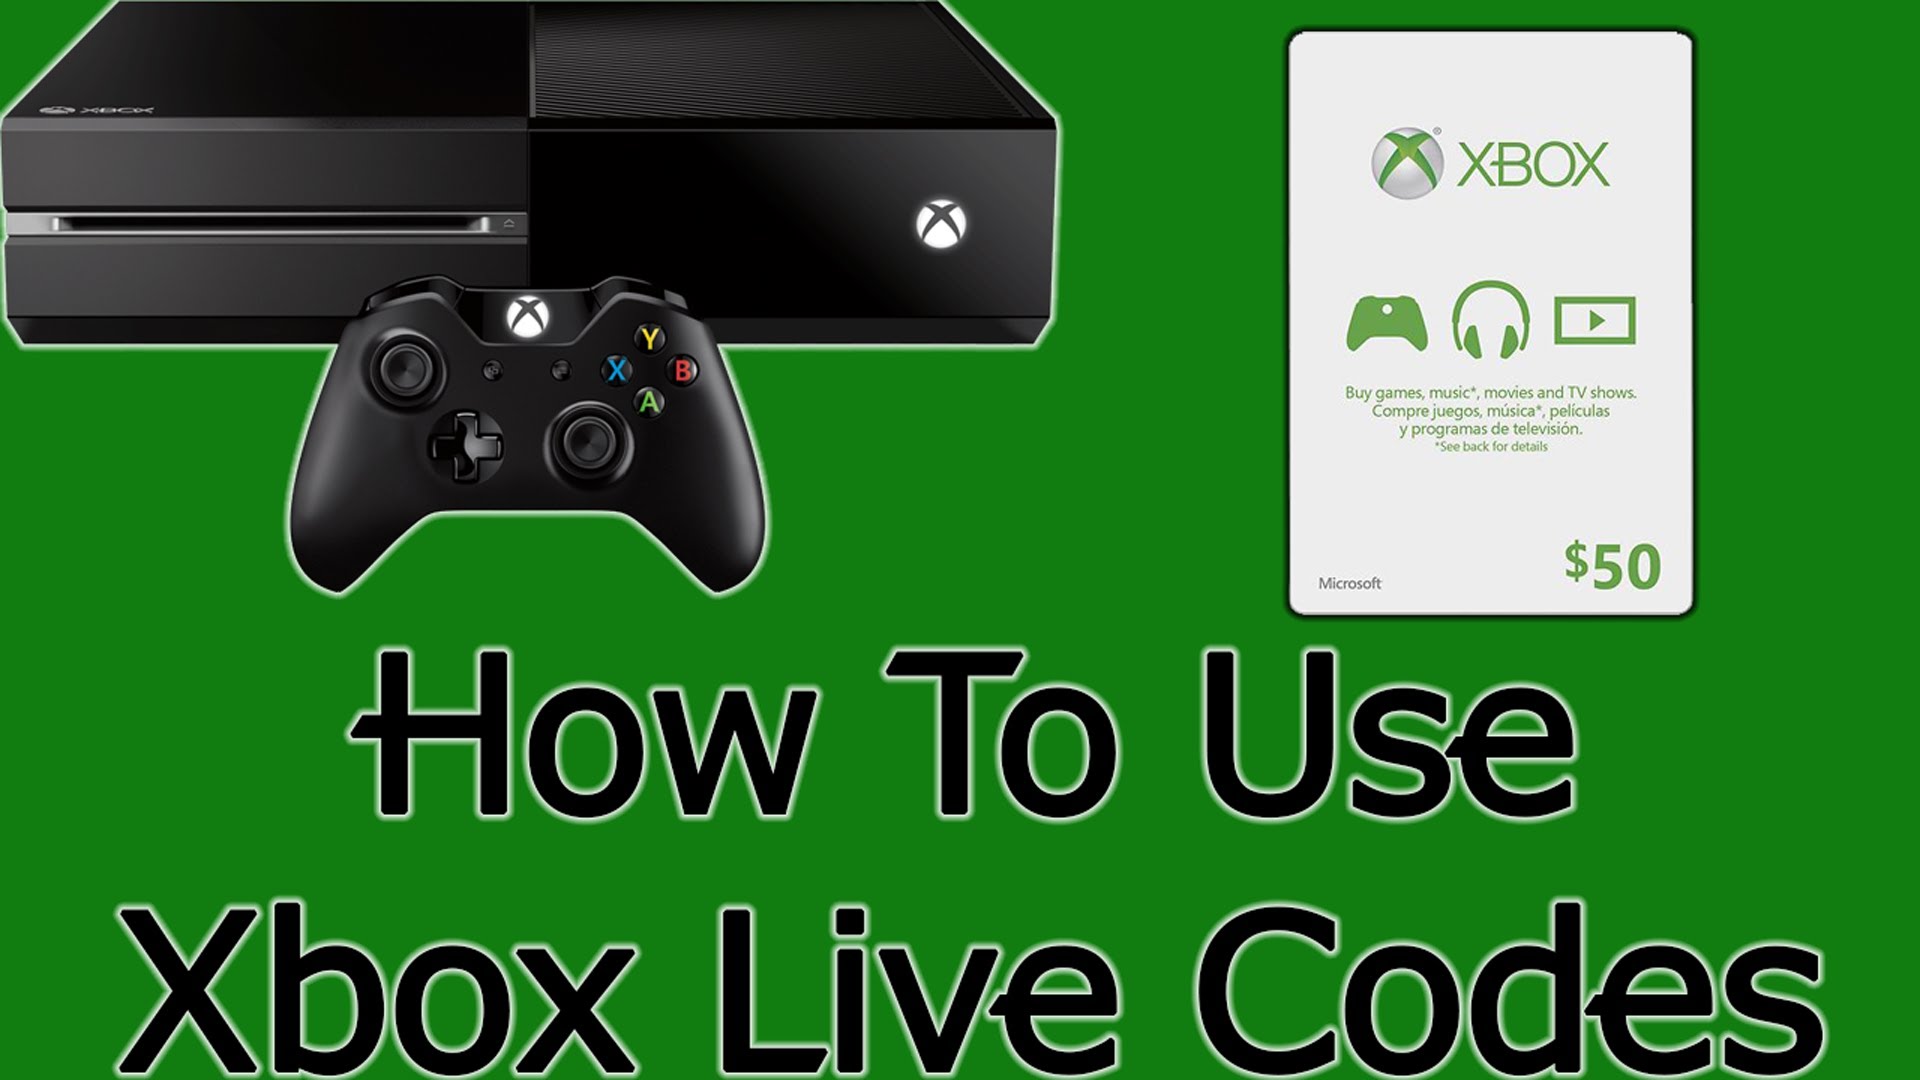 Xbox Live Gold 1 month - How Much Is 1 Month Of Xbox Live